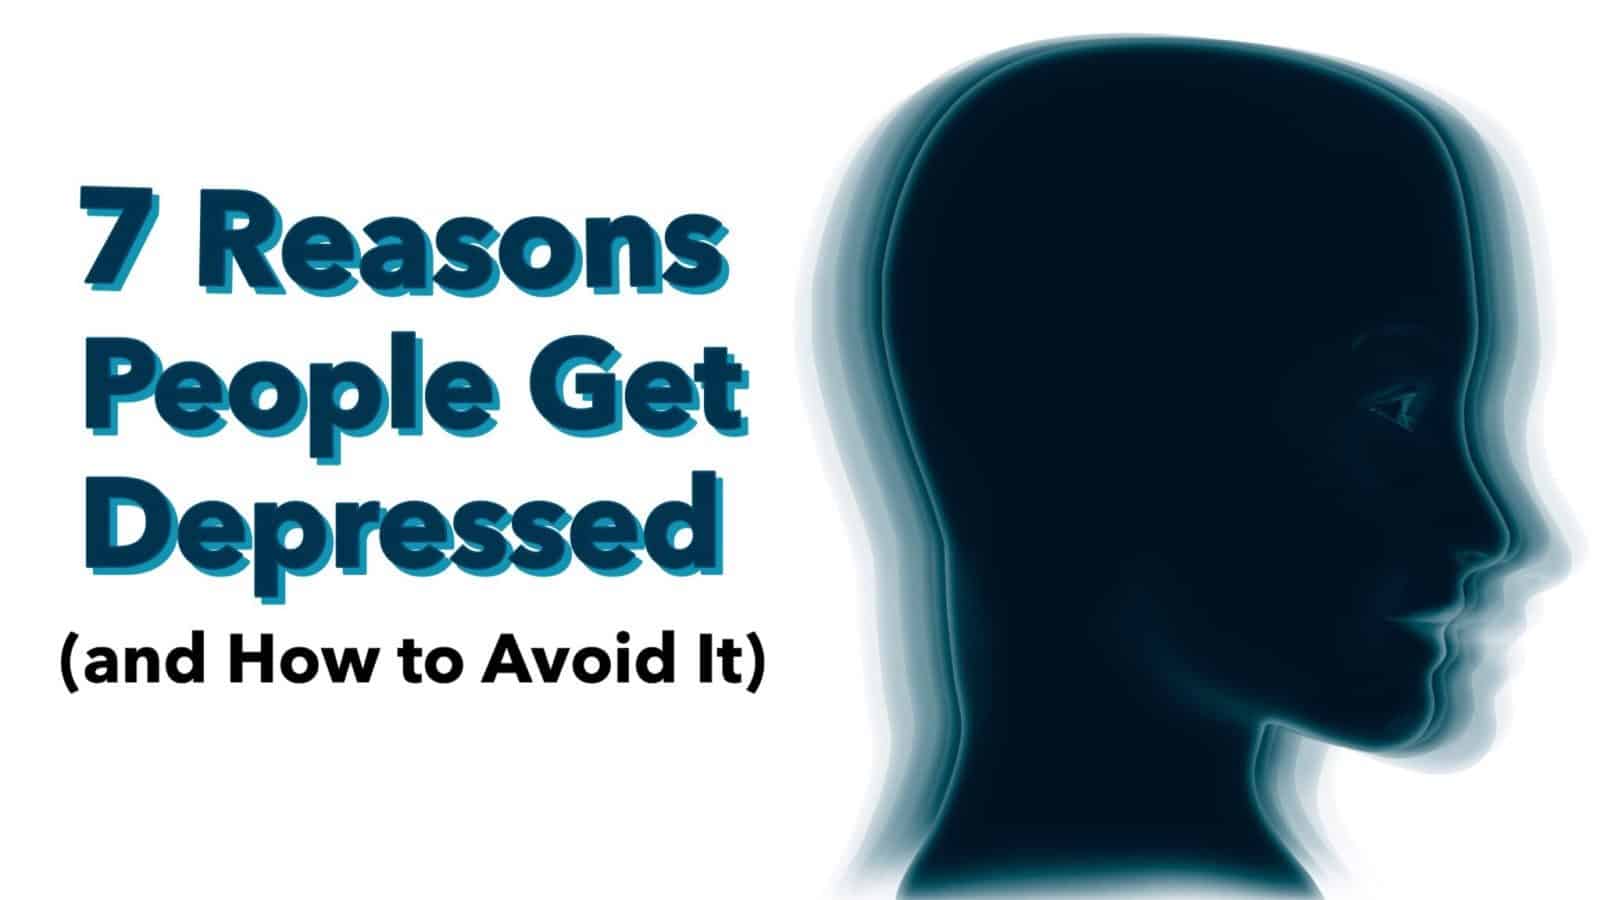 7 Reasons People Get Depressed (and How to Avoid It)